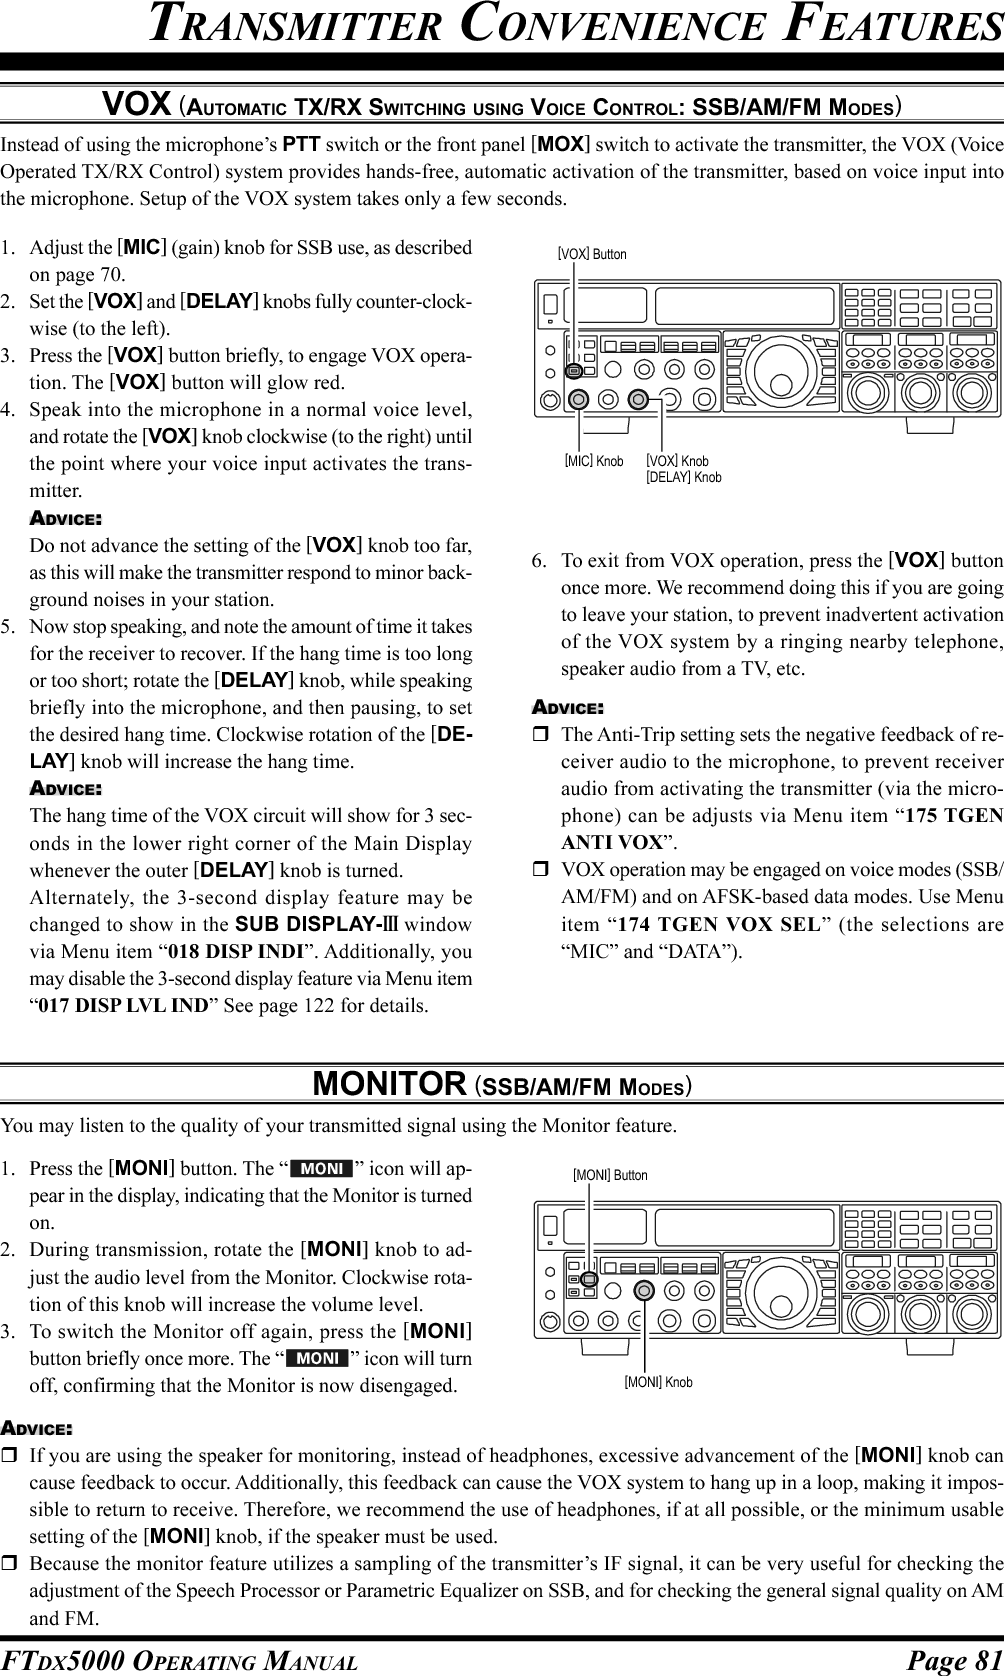 Page 81FTDX5000 OPERATING MANUALVOX (AUTOMATIC TX/RX SWITCHING USING VOICE CONTROL: SSB/AM/FM MODES)Instead of using the microphone’s PTT switch or the front panel [MOX] switch to activate the transmitter, the VOX (VoiceOperated TX/RX Control) system provides hands-free, automatic activation of the transmitter, based on voice input intothe microphone. Setup of the VOX system takes only a few seconds.1. Adjust the [MIC] (gain) knob for SSB use, as describedon page 70.2. Set the [VOX] and [DELAY] knobs fully counter-clock-wise (to the left).3. Press the [VOX] button briefly, to engage VOX opera-tion. The [VOX] button will glow red.4. Speak into the microphone in a normal voice level,and rotate the [VOX] knob clockwise (to the right) untilthe point where your voice input activates the trans-mitter.ADVICE:Do not advance the setting of the [VOX] knob too far,as this will make the transmitter respond to minor back-ground noises in your station.5. Now stop speaking, and note the amount of time it takesfor the receiver to recover. If the hang time is too longor too short; rotate the [DELAY] knob, while speakingbriefly into the microphone, and then pausing, to setthe desired hang time. Clockwise rotation of the [DE-LAY] knob will increase the hang time.ADVICE:The hang time of the VOX circuit will show for 3 sec-onds in the lower right corner of the Main Displaywhenever the outer [DELAY] knob is turned.Alternately, the 3-second display feature may bechanged to show in the SUB DISPLAY-III windowvia Menu item “018 DISP INDI”. Additionally, youmay disable the 3-second display feature via Menu item“017 DISP LVL IND” See page 122 for details.MONITOR (SSB/AM/FM MODES)You may listen to the quality of your transmitted signal using the Monitor feature.1. Press the [MONI] button. The “ ” icon will ap-pear in the display, indicating that the Monitor is turnedon.2. During transmission, rotate the [MONI] knob to ad-just the audio level from the Monitor. Clockwise rota-tion of this knob will increase the volume level.3. To switch the Monitor off again, press the [MONI]button briefly once more. The “ ” icon will turnoff, confirming that the Monitor is now disengaged.TRANSMITTER CONVENIENCE FEATURES6. To exit from VOX operation, press the [VOX] buttononce more. We recommend doing this if you are goingto leave your station, to prevent inadvertent activationof the VOX system by a ringing nearby telephone,speaker audio from a TV, etc.ADVICE:The Anti-Trip setting sets the negative feedback of re-ceiver audio to the microphone, to prevent receiveraudio from activating the transmitter (via the micro-phone) can be adjusts via Menu item “175 TGENANTI VOX”.VOX operation may be engaged on voice modes (SSB/AM/FM) and on AFSK-based data modes. Use Menuitem “174 TGEN VOX SEL” (the selections are“MIC” and “DATA”).ADVICE:If you are using the speaker for monitoring, instead of headphones, excessive advancement of the [MONI] knob cancause feedback to occur. Additionally, this feedback can cause the VOX system to hang up in a loop, making it impos-sible to return to receive. Therefore, we recommend the use of headphones, if at all possible, or the minimum usablesetting of the [MONI] knob, if the speaker must be used.Because the monitor feature utilizes a sampling of the transmitter’s IF signal, it can be very useful for checking theadjustment of the Speech Processor or Parametric Equalizer on SSB, and for checking the general signal quality on AMand FM.[VOX] Button[VOX] Knob[DELAY] Knob[MIC] Knob[MONI] Button[MONI] Knob